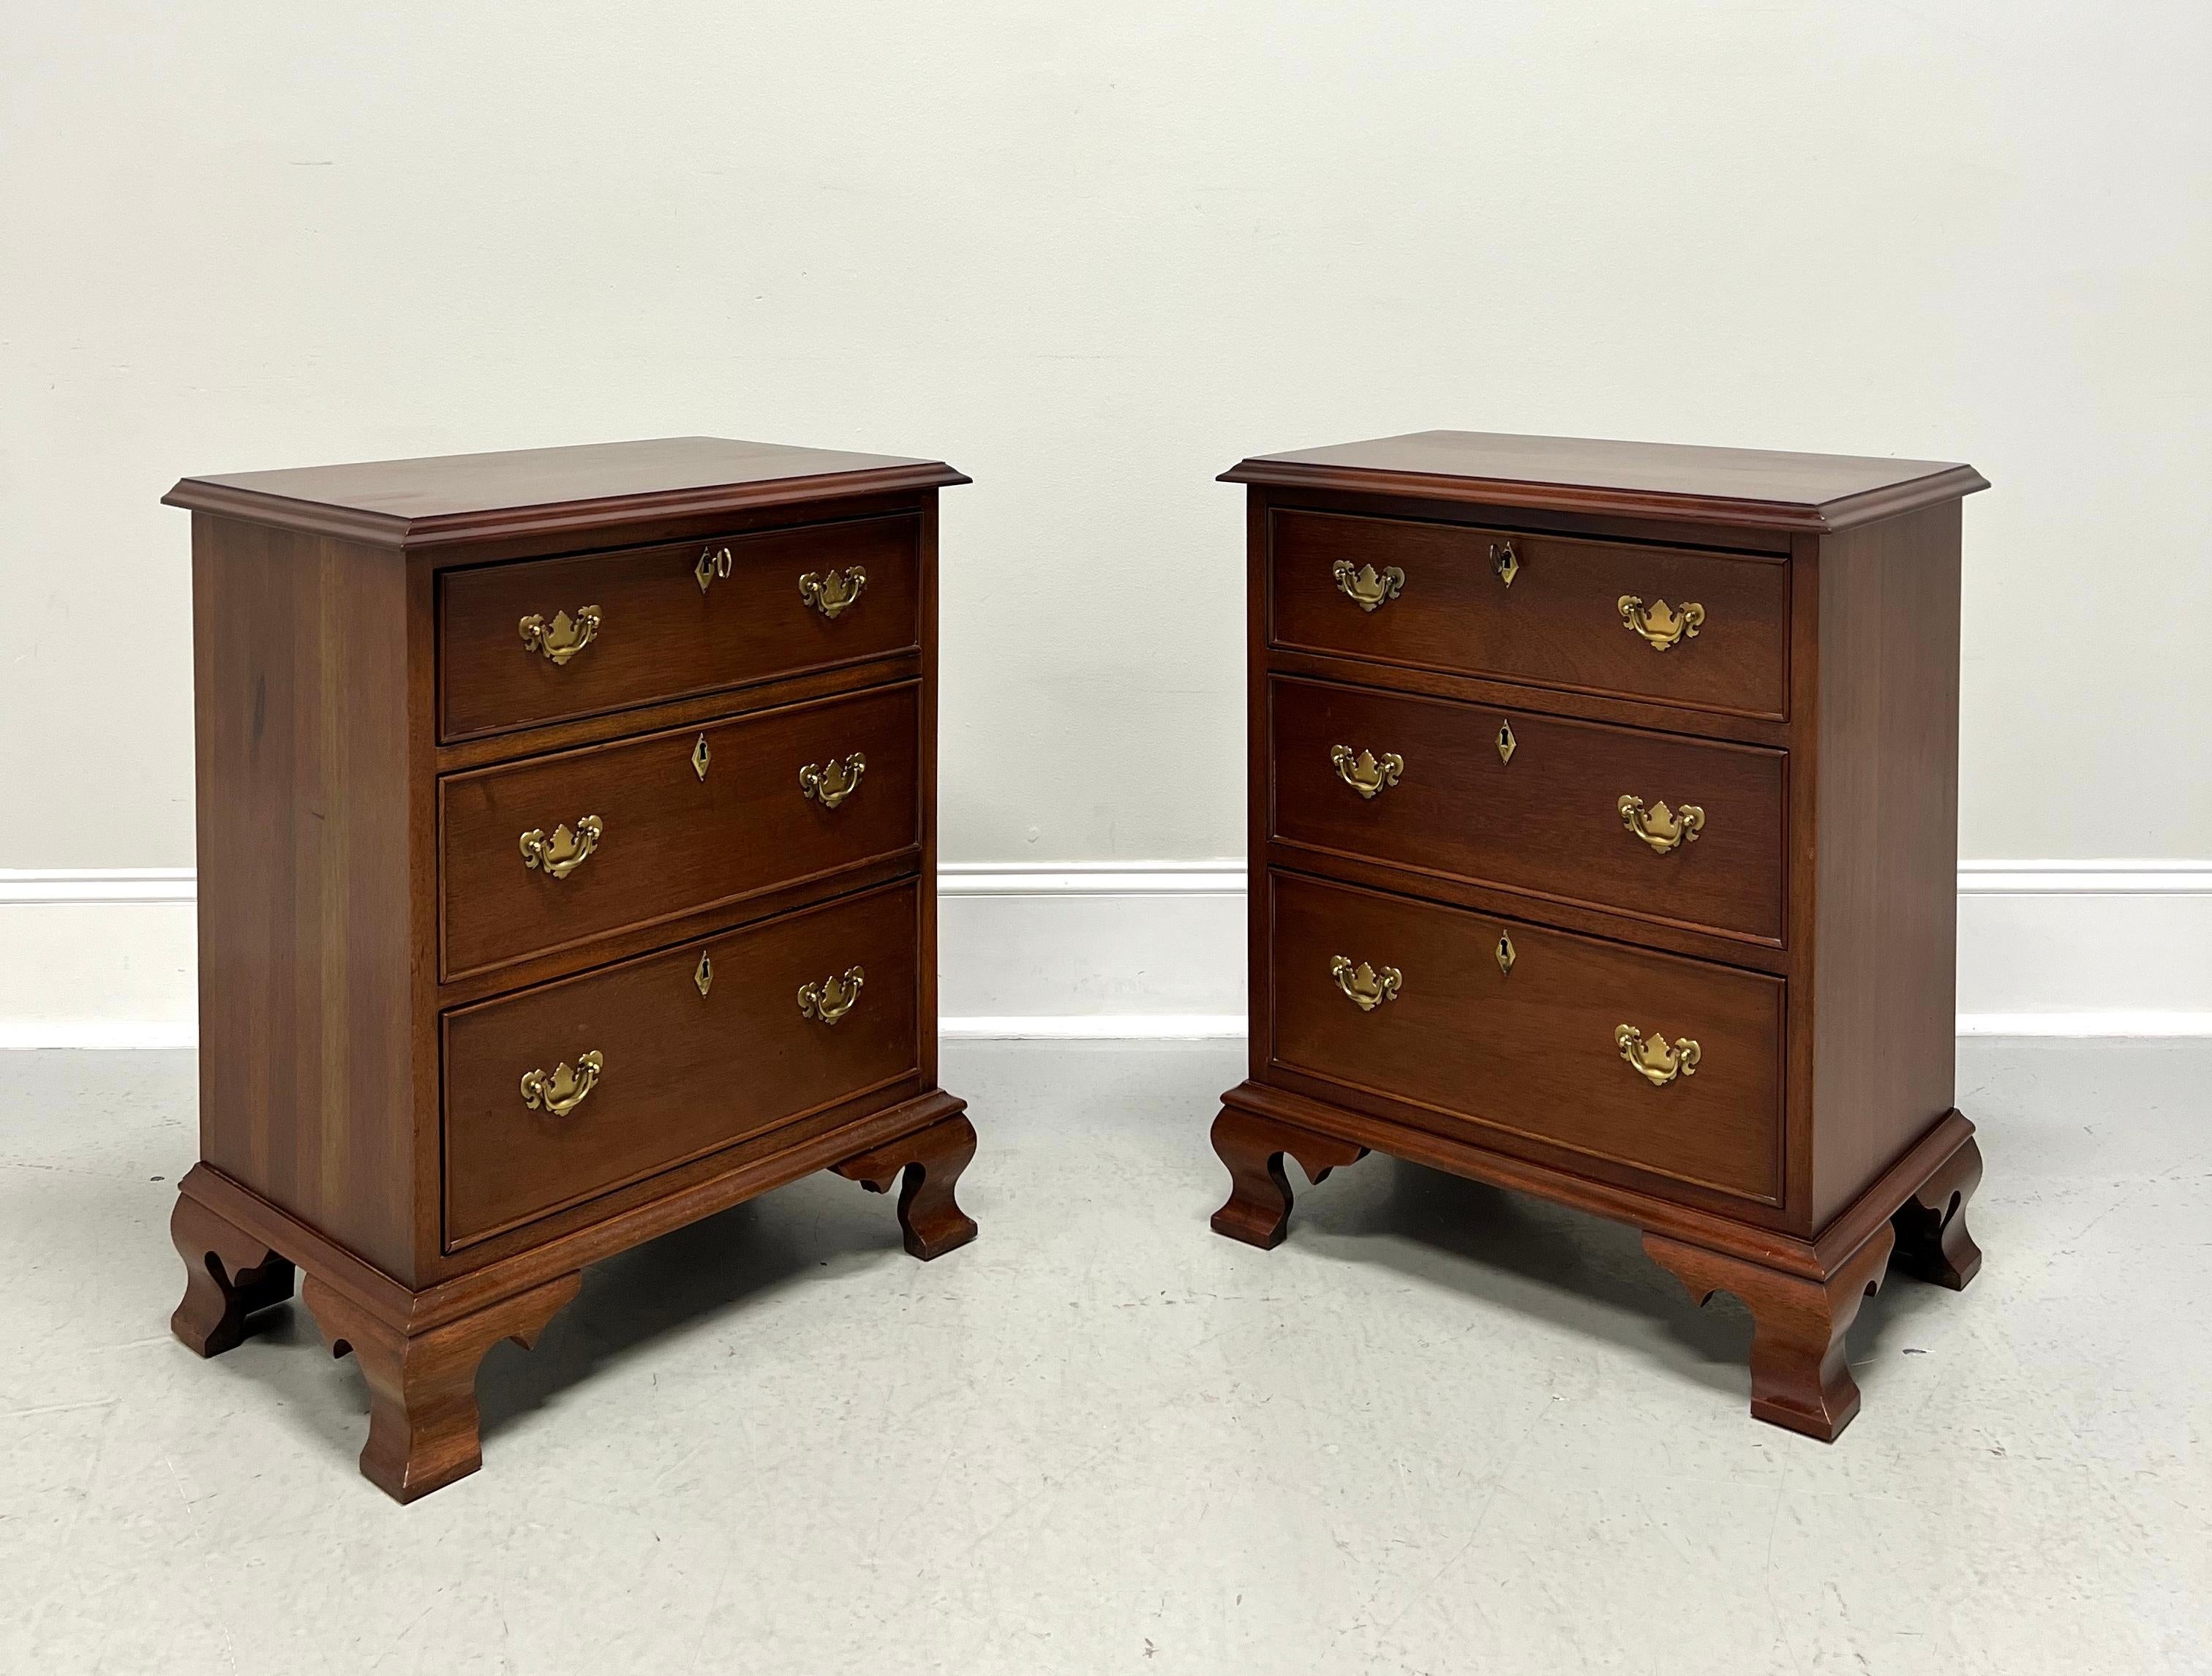 CRAFTIQUE Solid Mahogany Chippendale Style Three-Drawer Nightstands - Pair For Sale 7